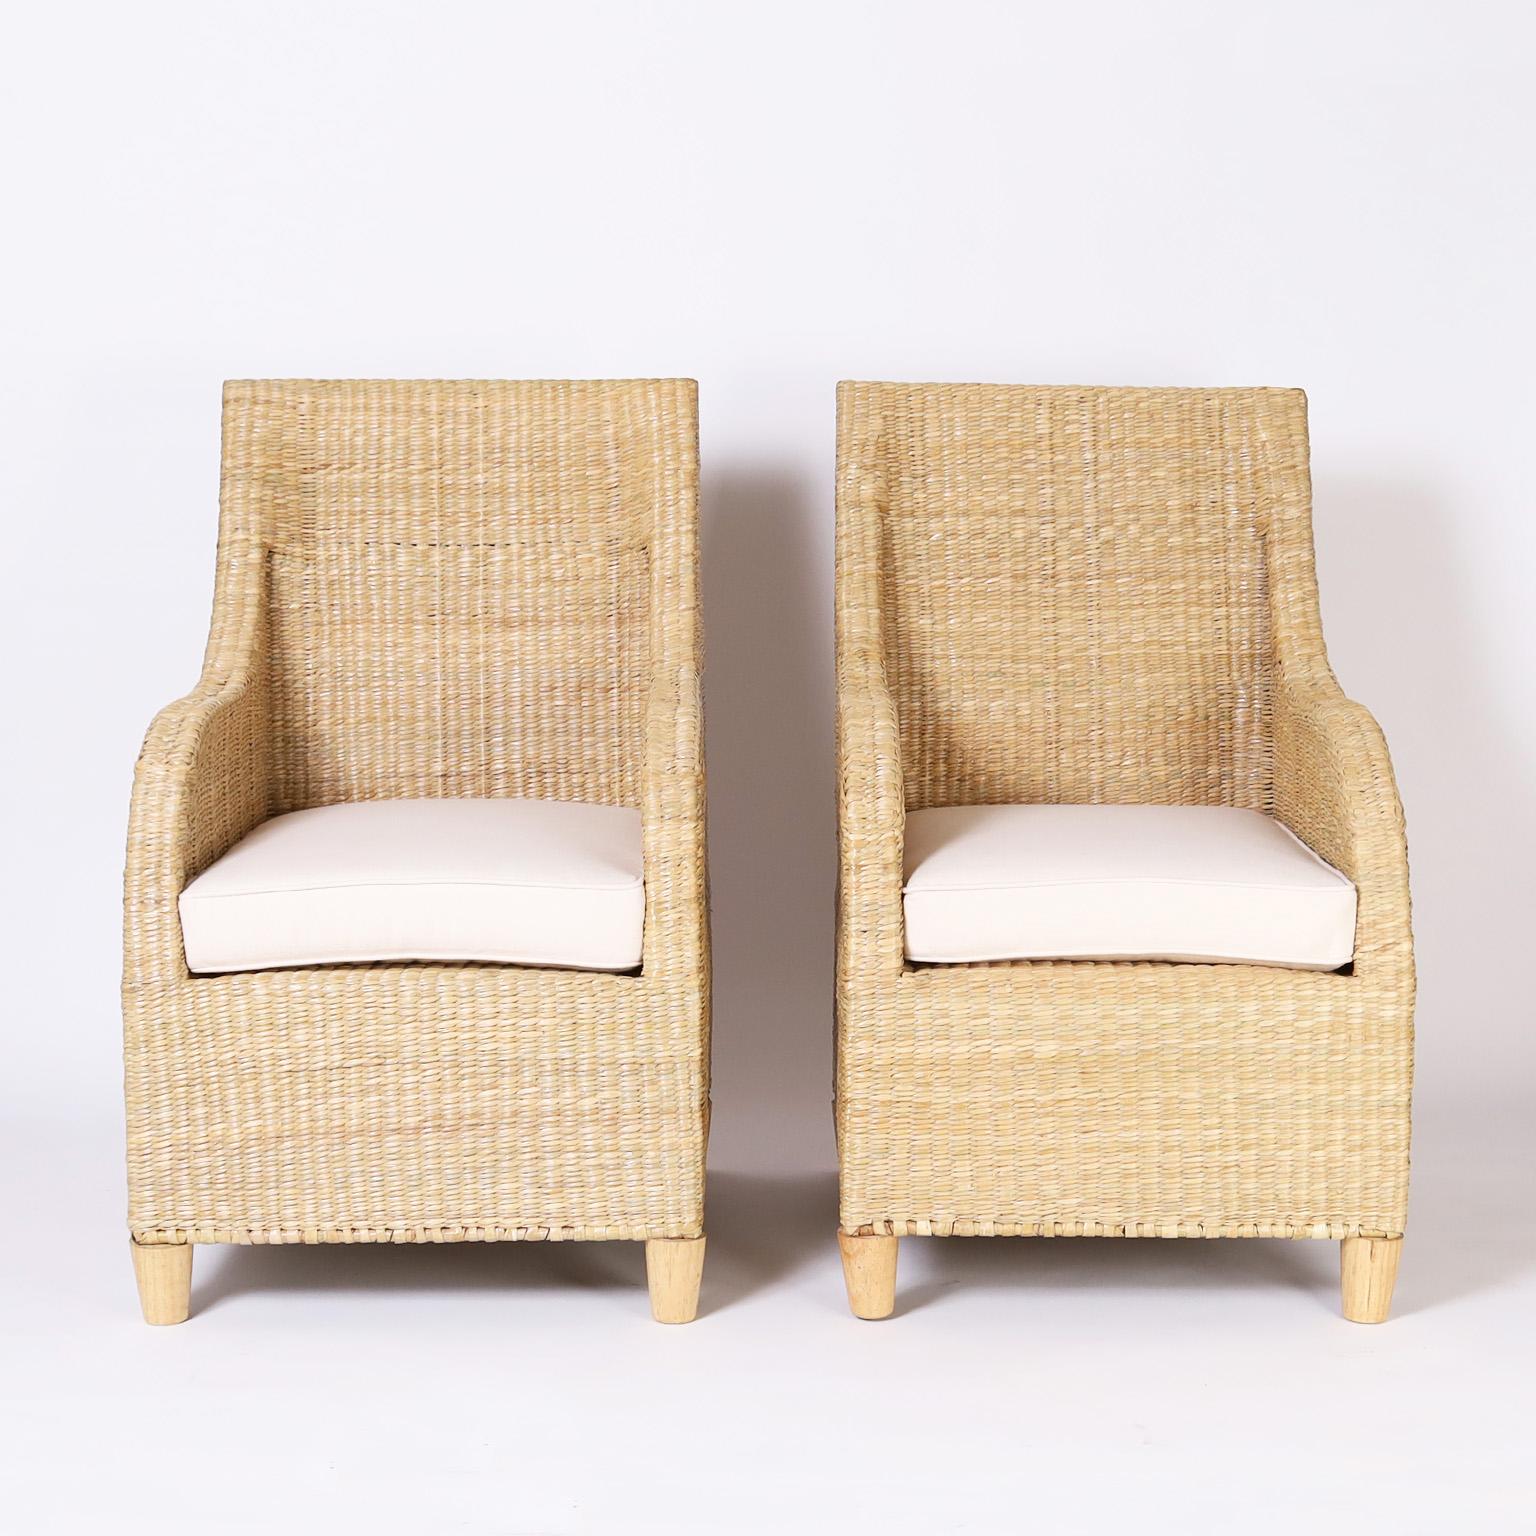 Pair of mid century inspired armchairs crafted in wicker or reed ambitiously woven over a sturdy metal frame. One of many new designs from the FS Flores Collection, offered exclusively by F.S. Henemader Antiques. Priced per chair.